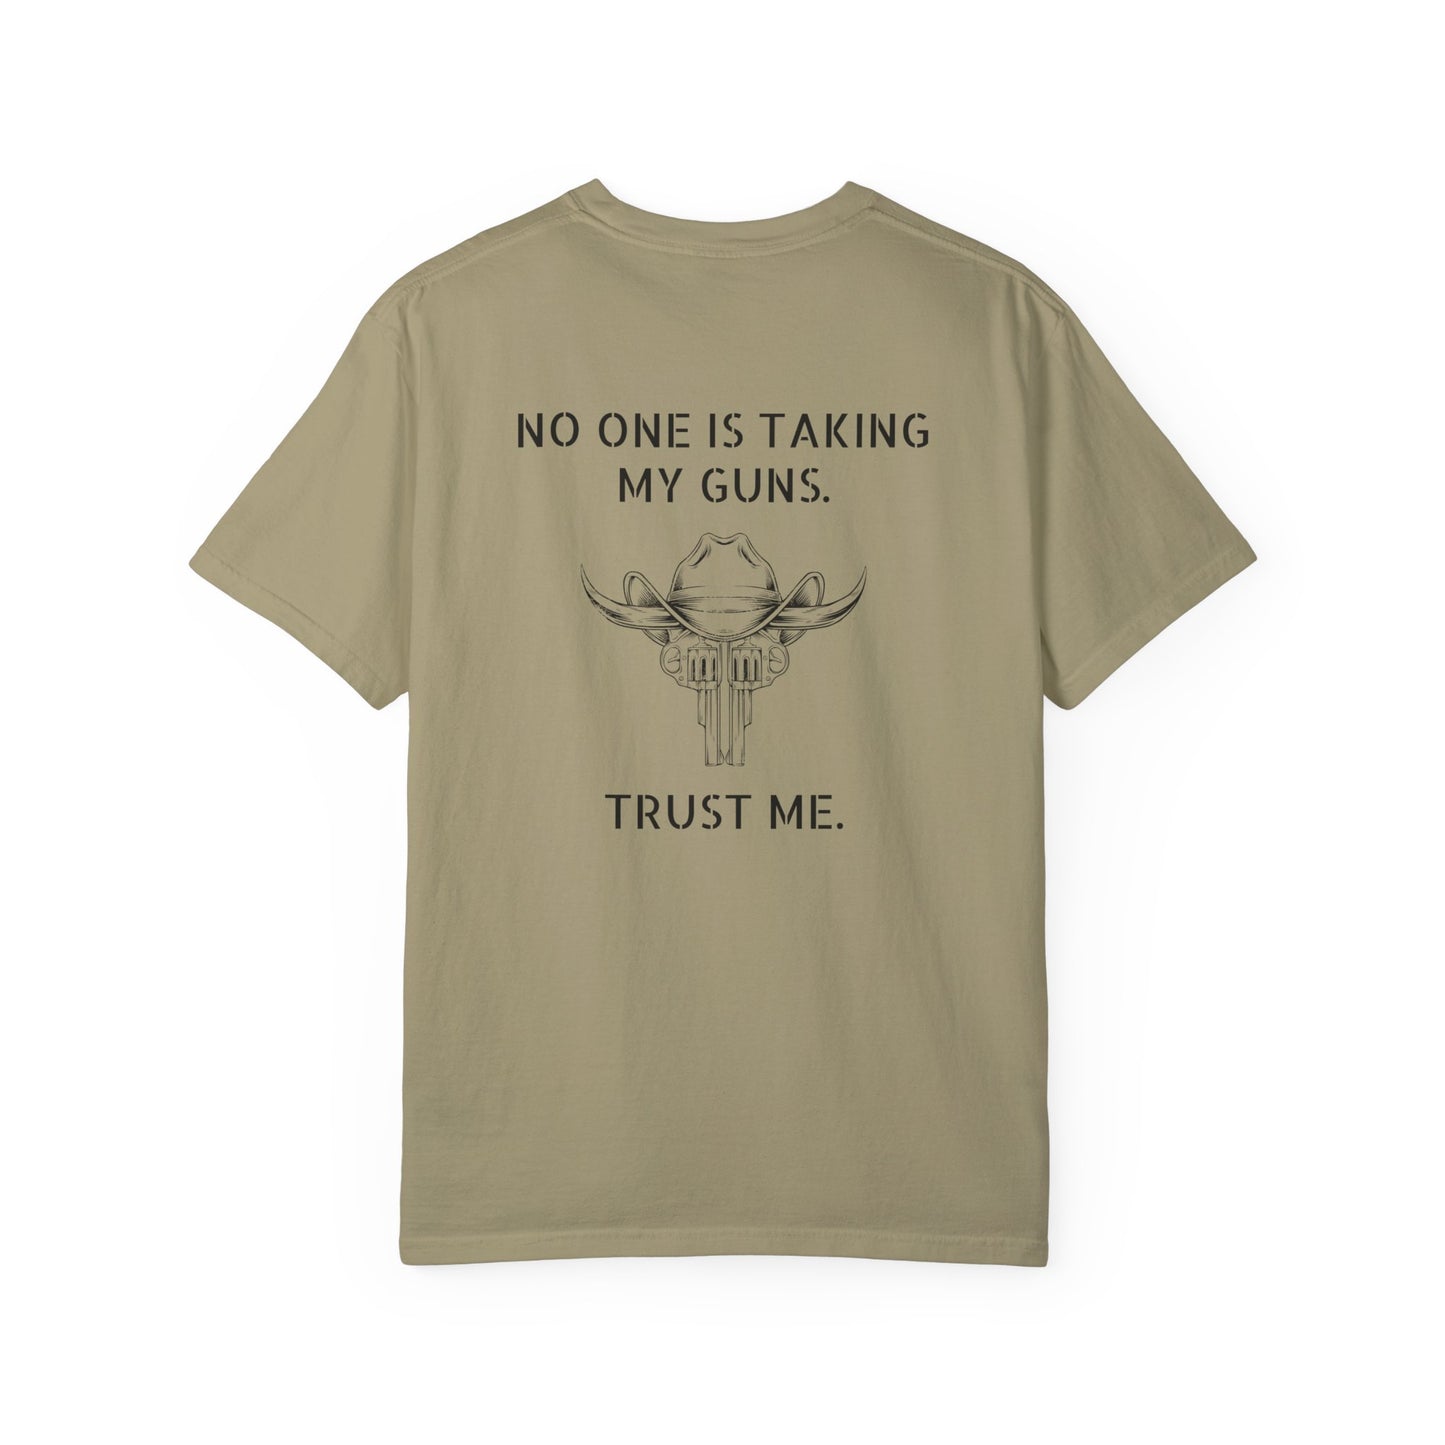 "NO ONE IS TAKING MY GUNS" Tee